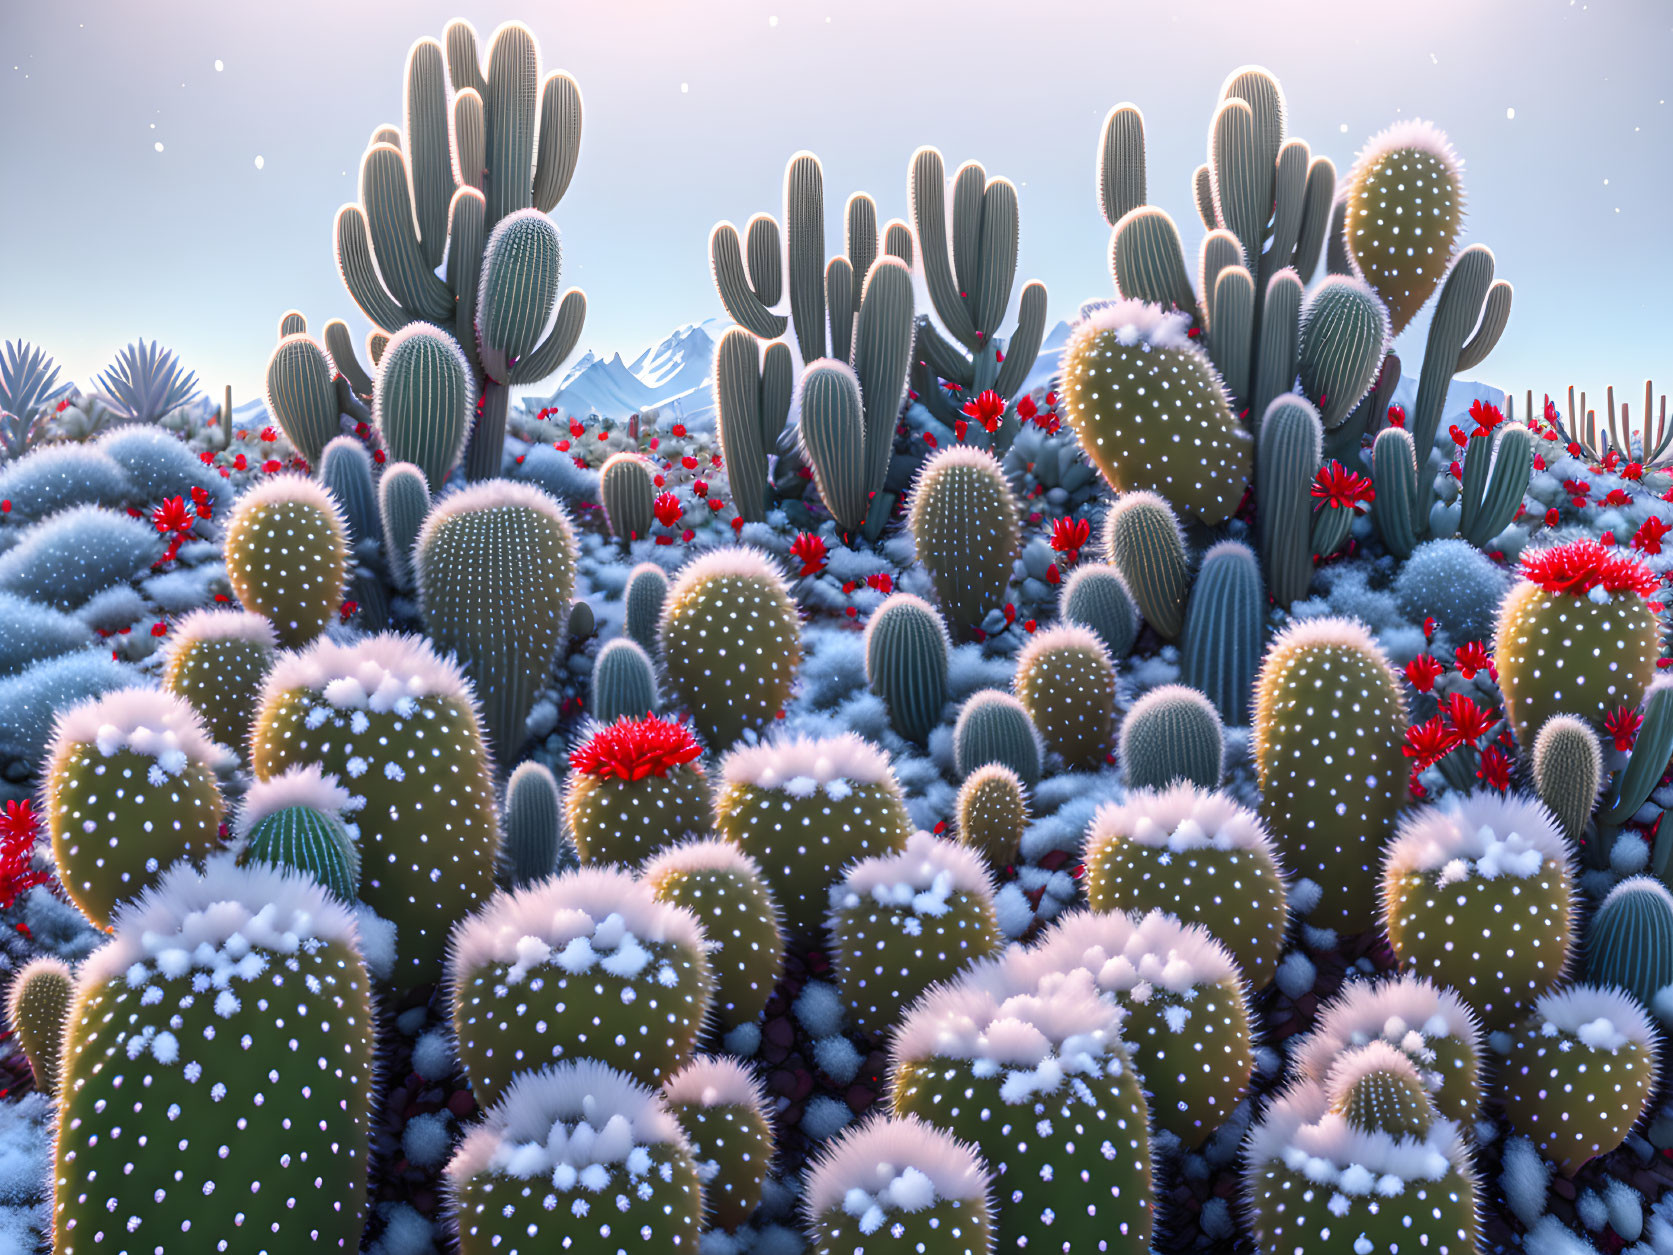 Digital illustration: Snow-covered cacti in mountain landscape